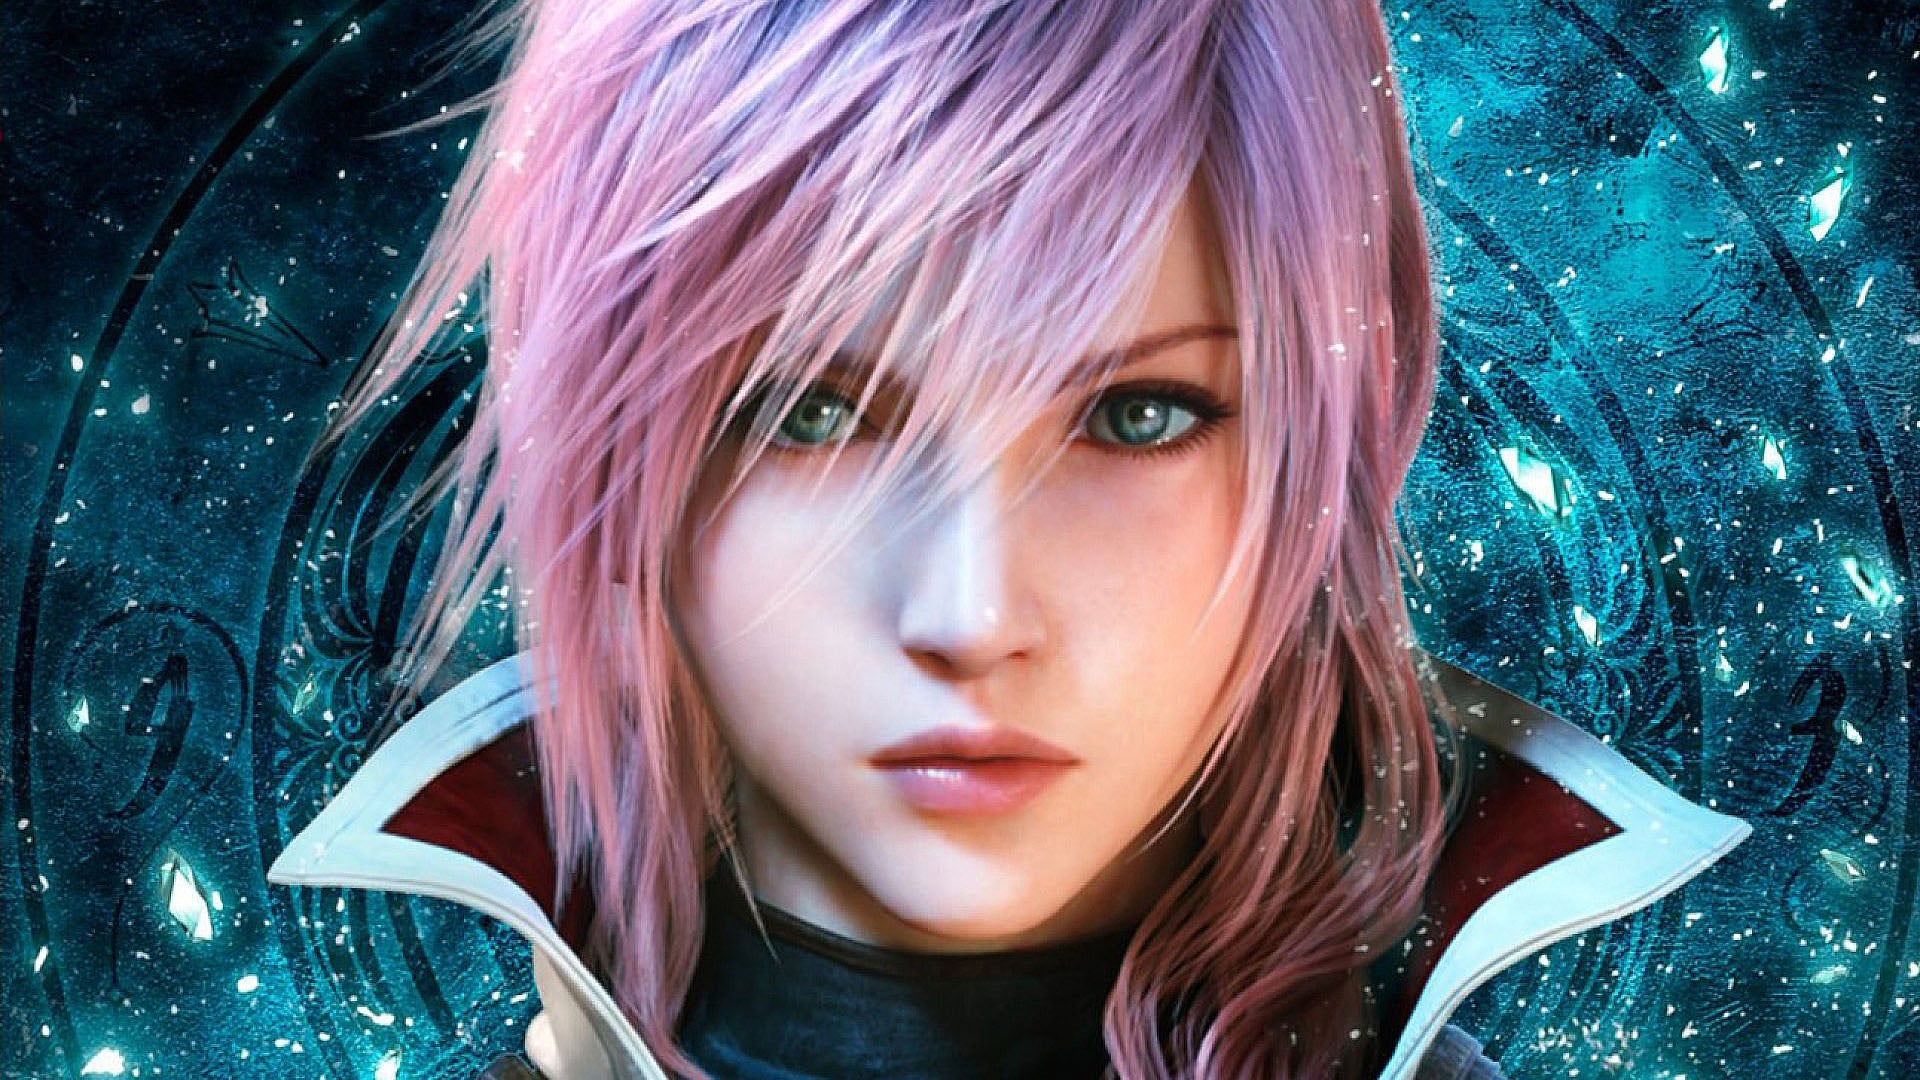 Image for DF Retro - The Final Fantasy 13 Trilogy - Every Game + Every Version Analysed!